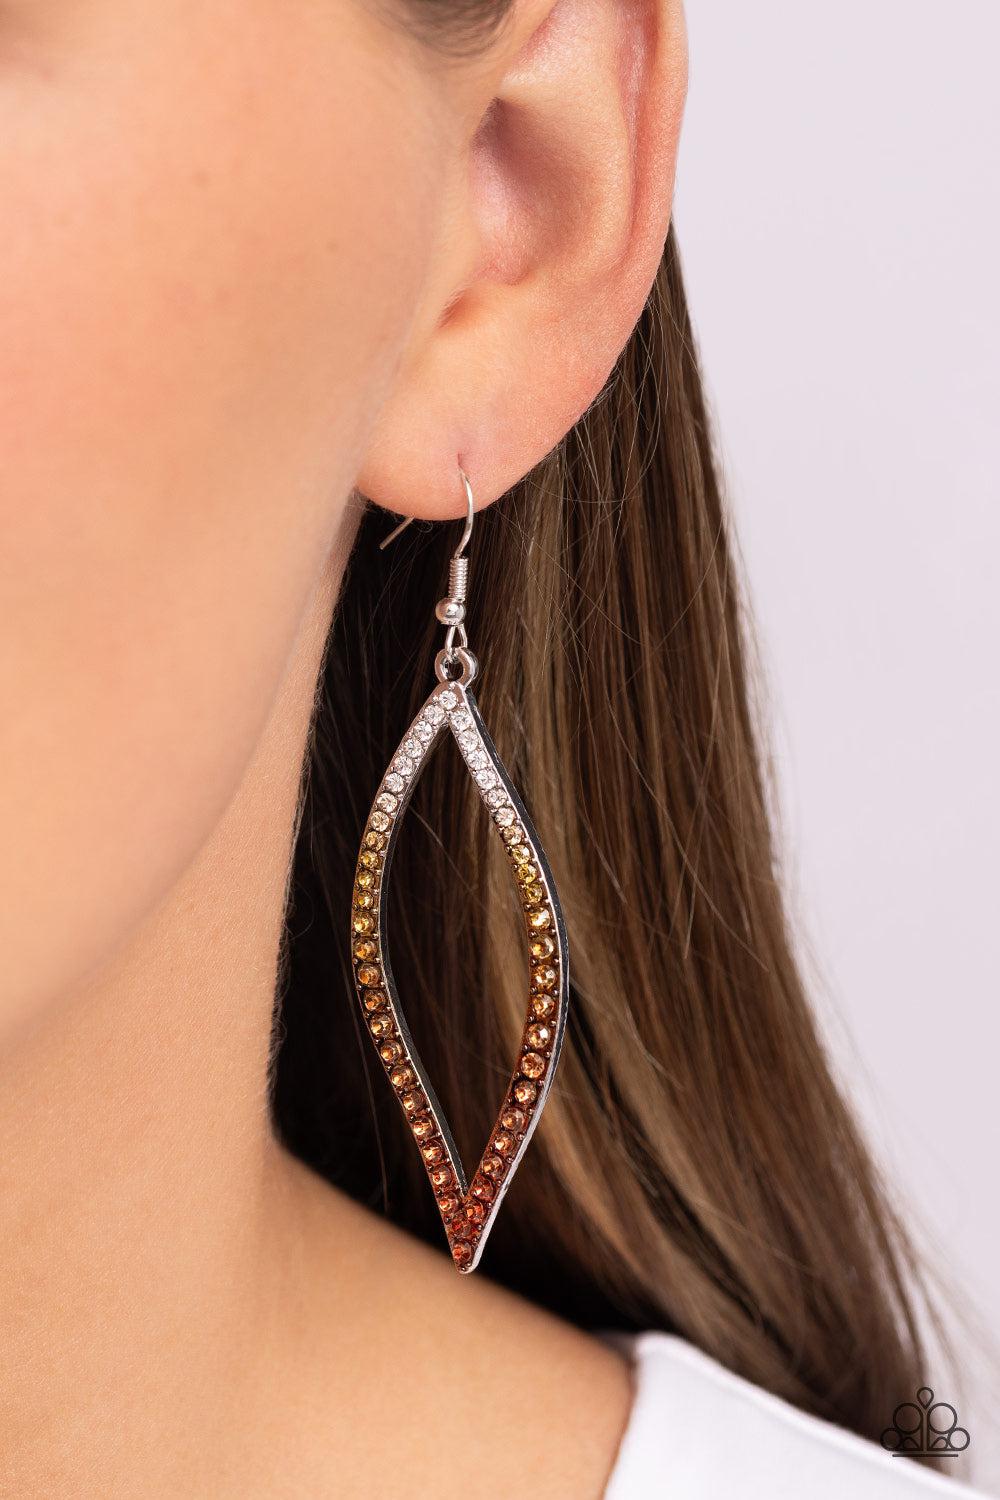 Admirable Asymmetry Multi White & Copper Ombre Earrings - Paparazzi Accessories- lightbox - CarasShop.com - $5 Jewelry by Cara Jewels